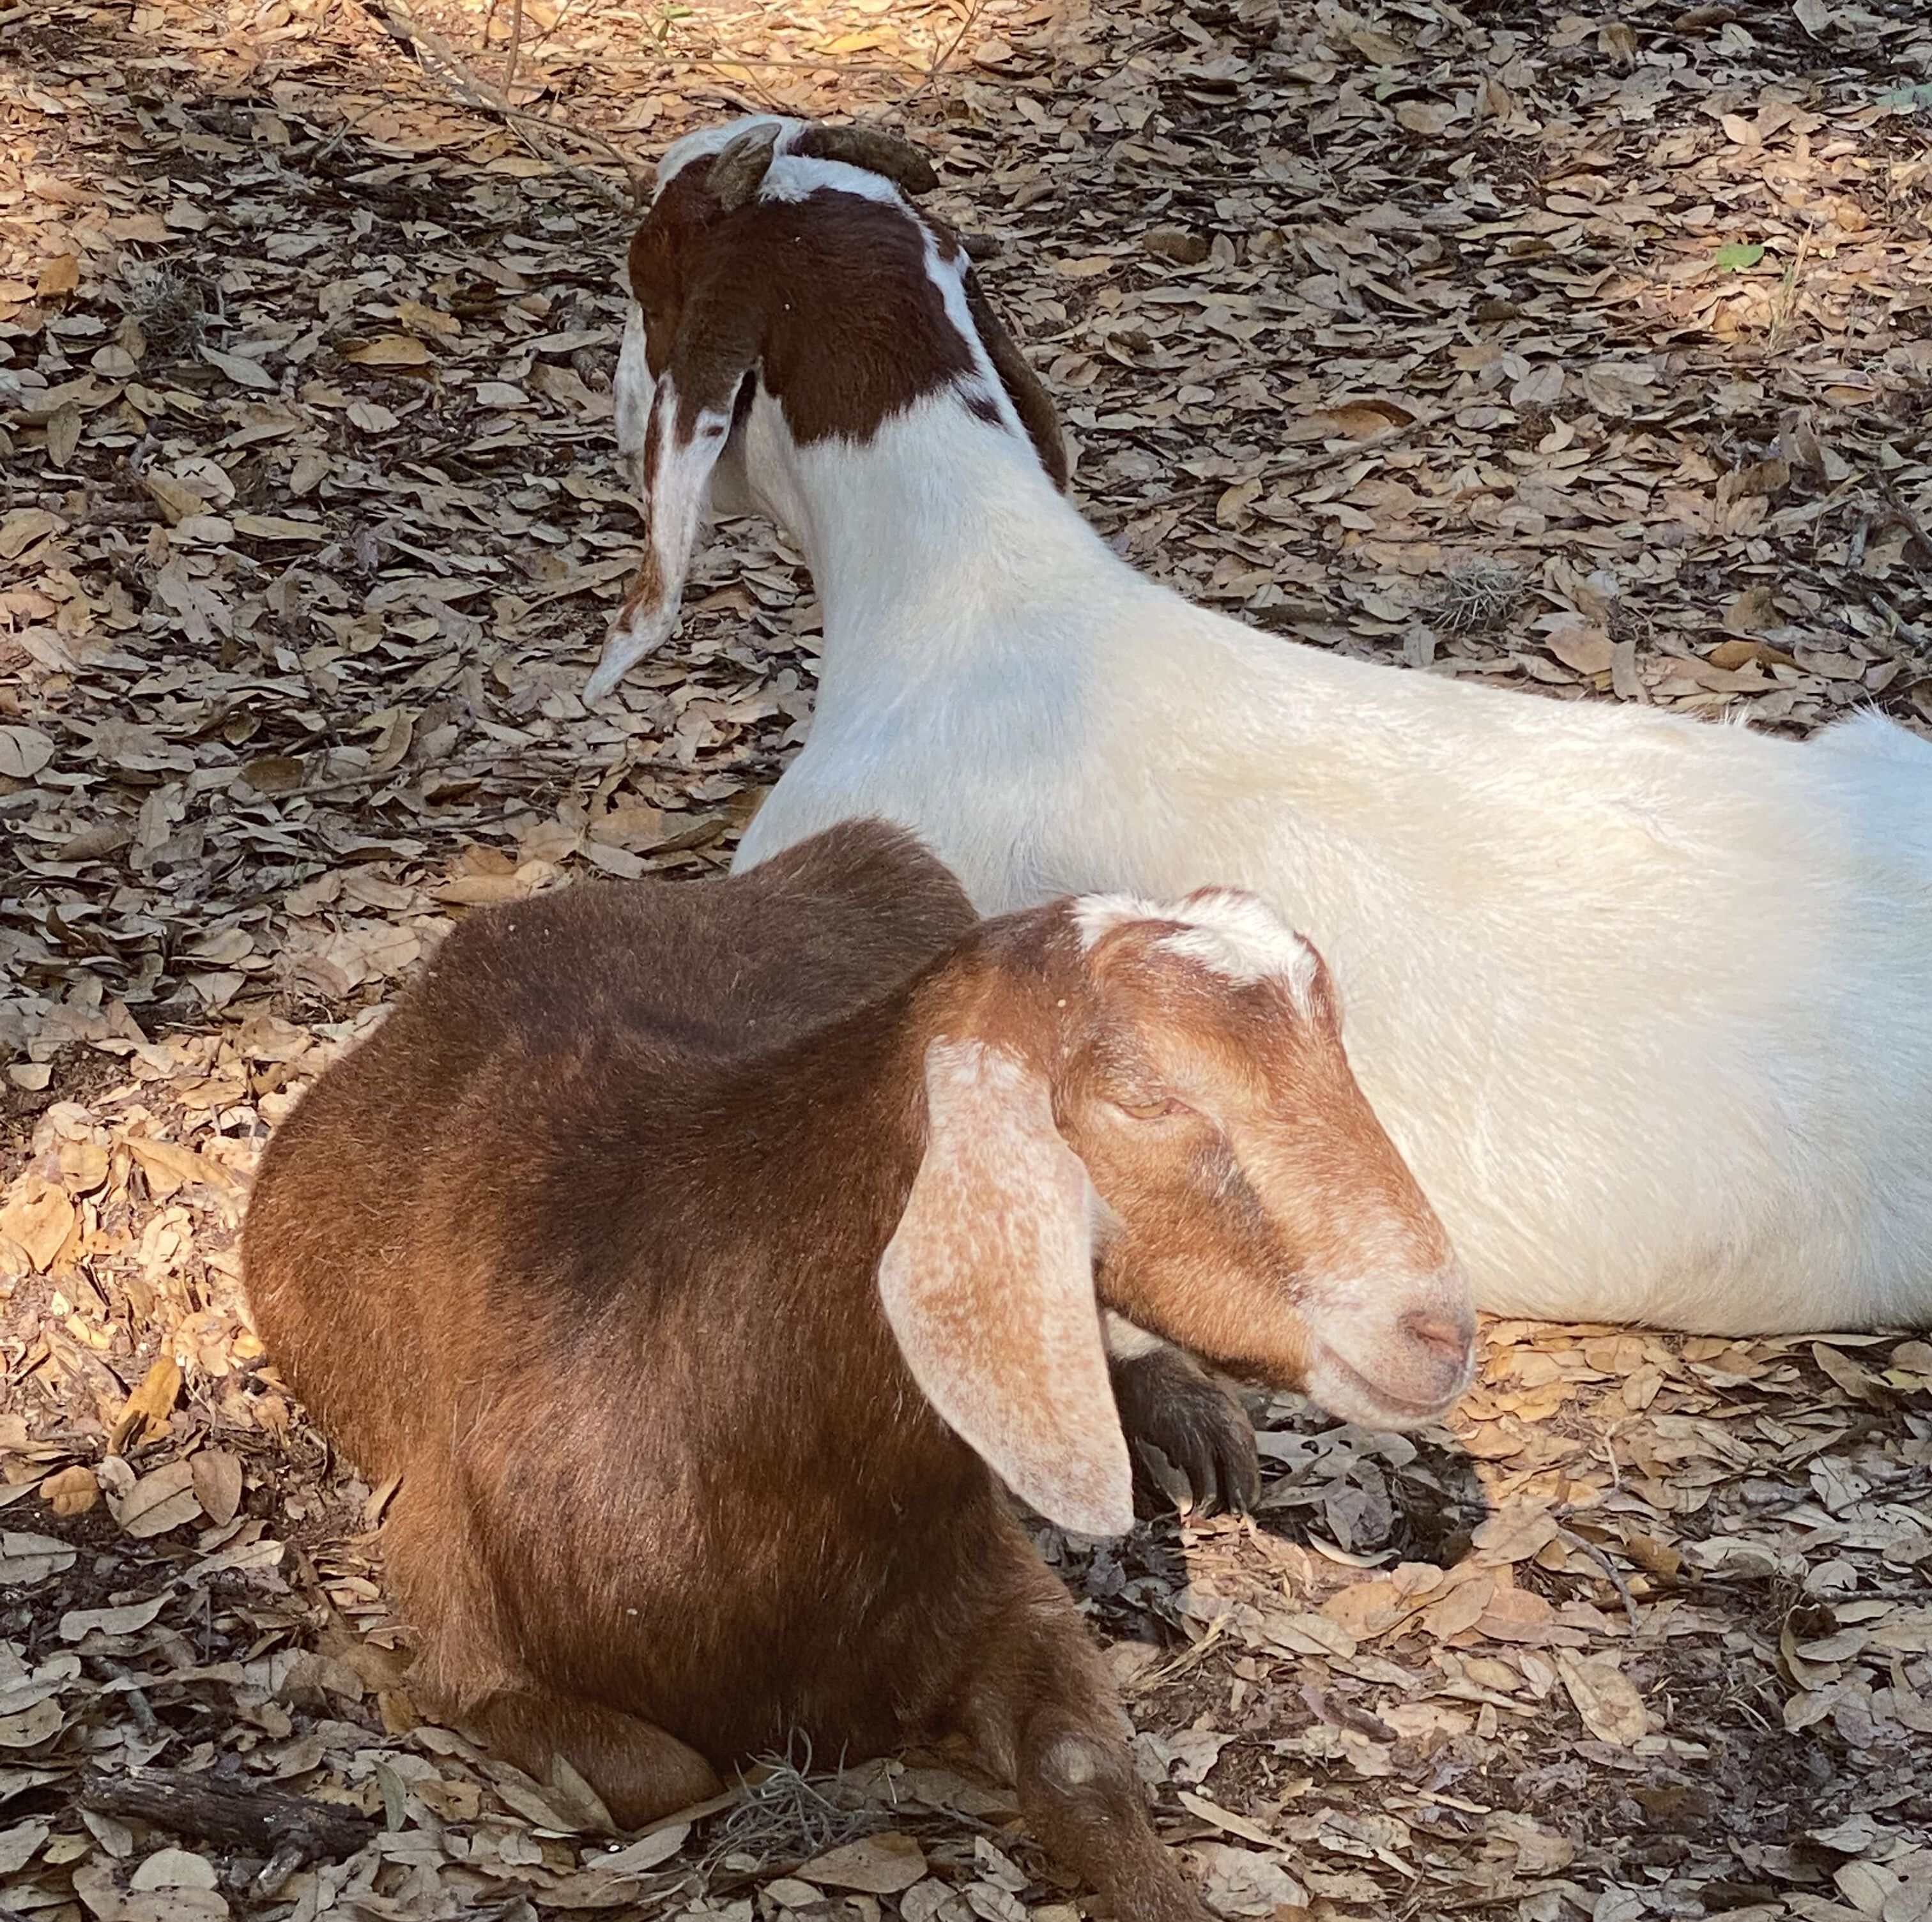 Support Go For Goats During Big Give Today!